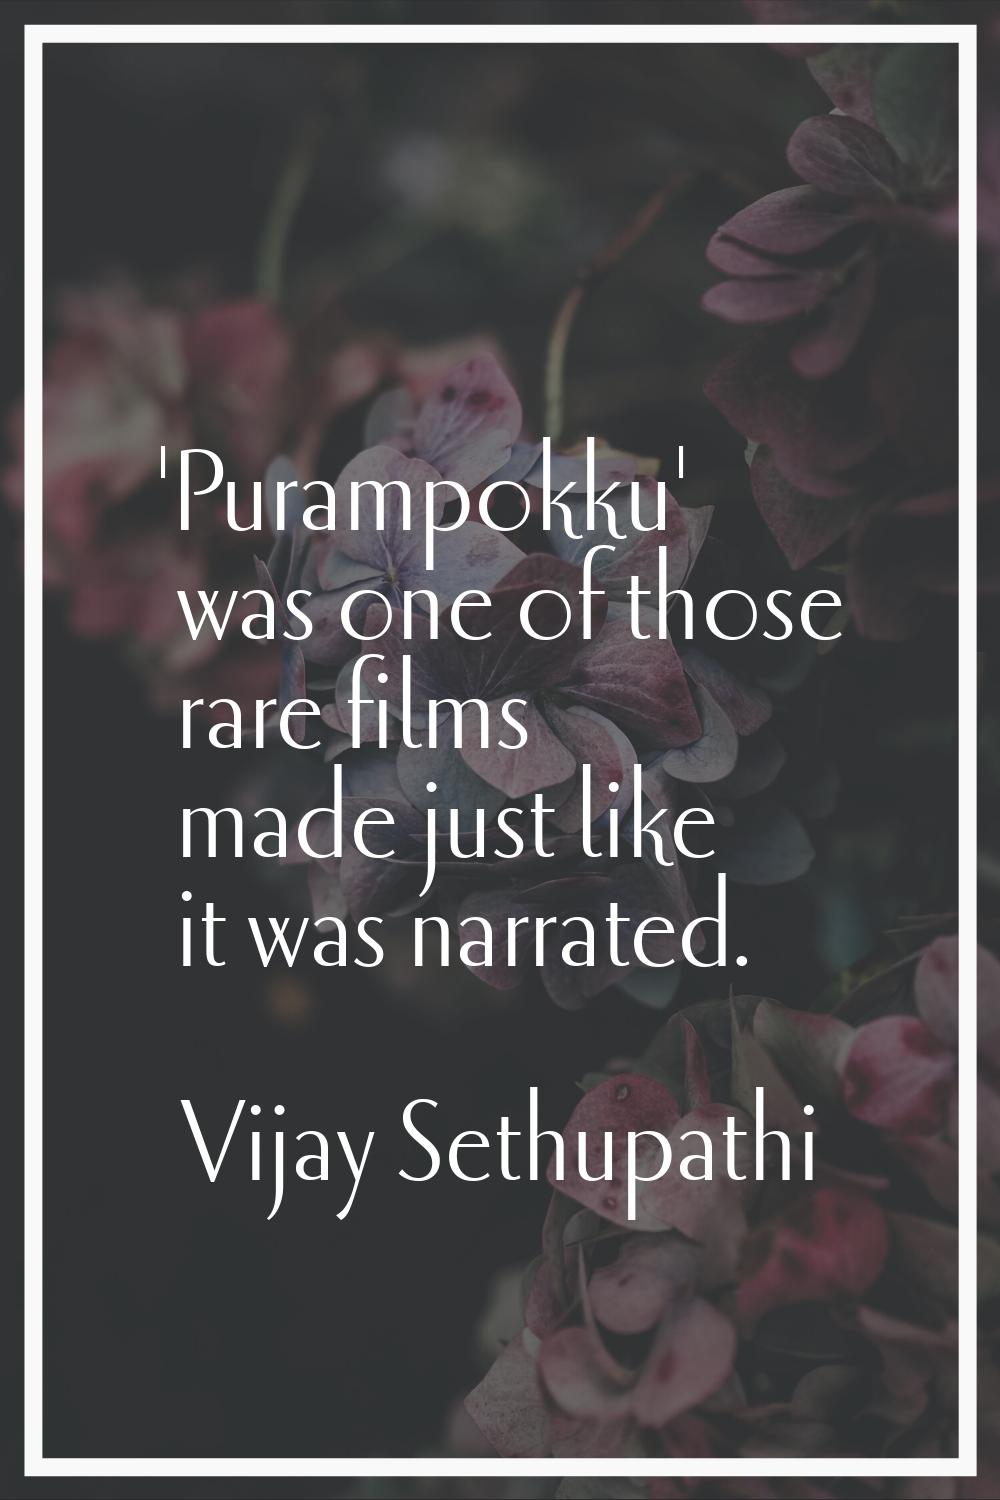 'Purampokku' was one of those rare films made just like it was narrated.